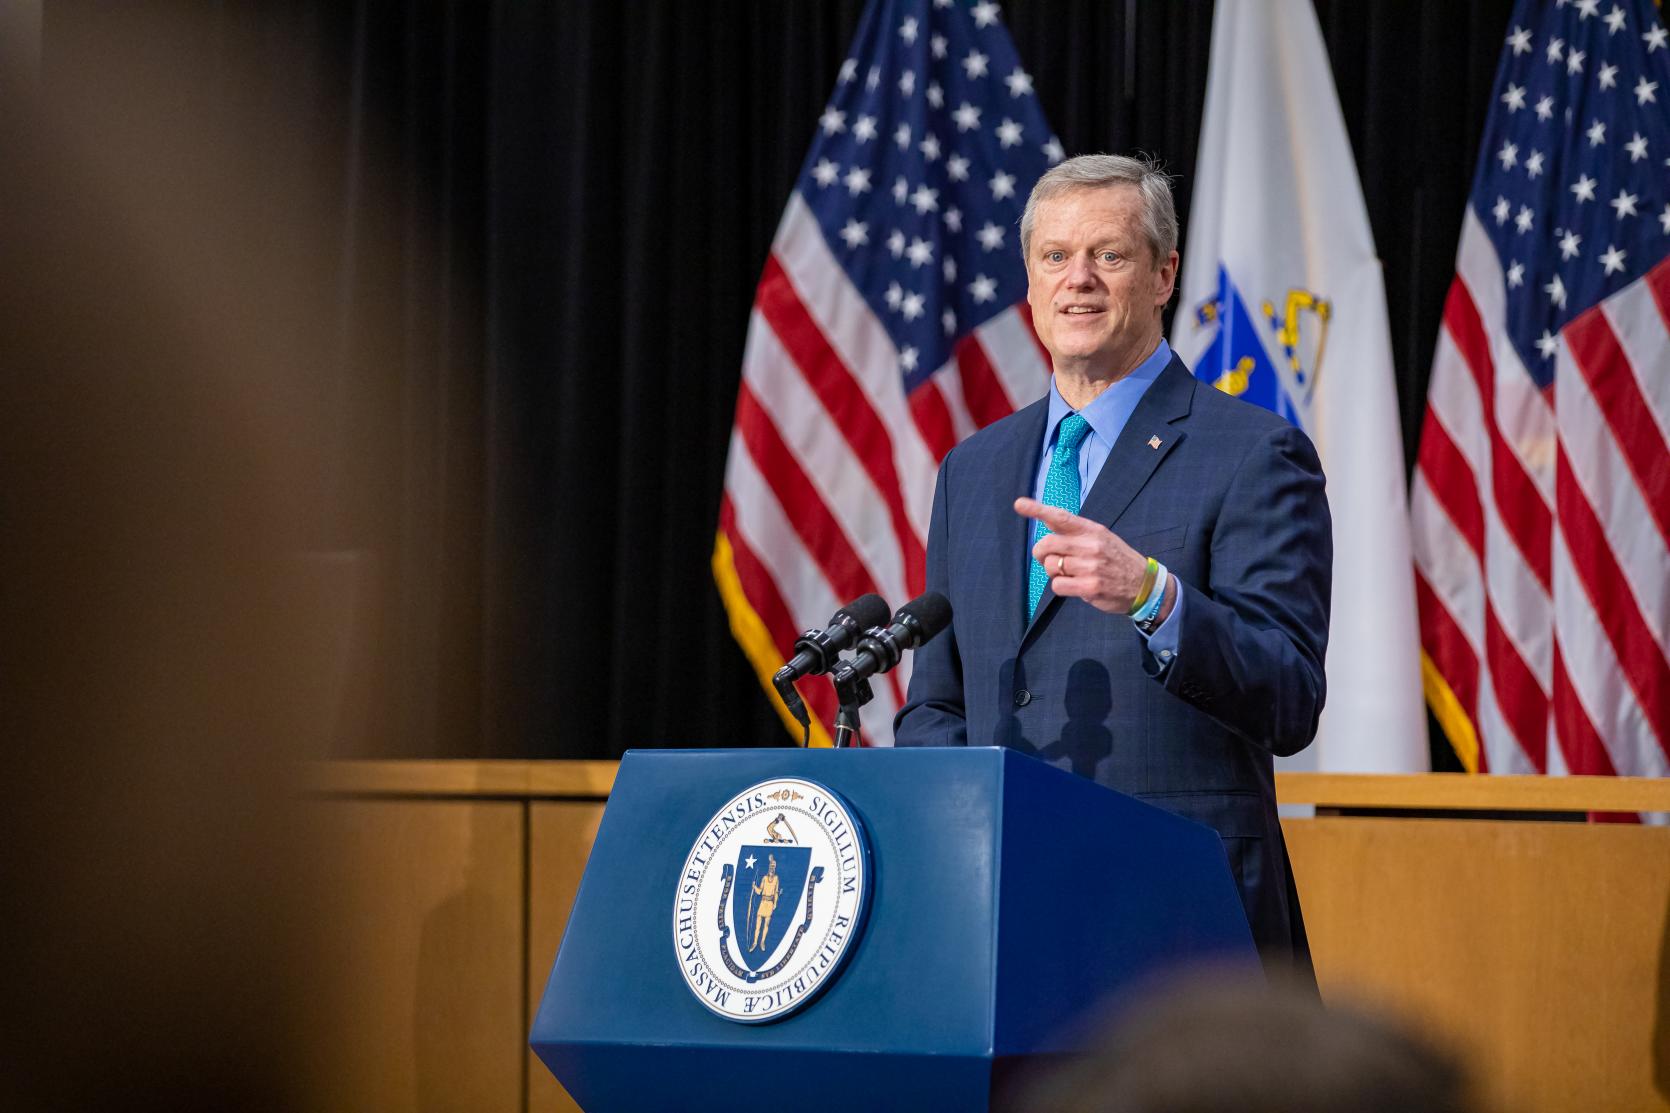 Baker-Polito Administration Awards Nearly $174 Million in Grants to 4,043 Additional Small Businesses for COVID Relief, Increases Capacity Limits for Businesses and Other Activities